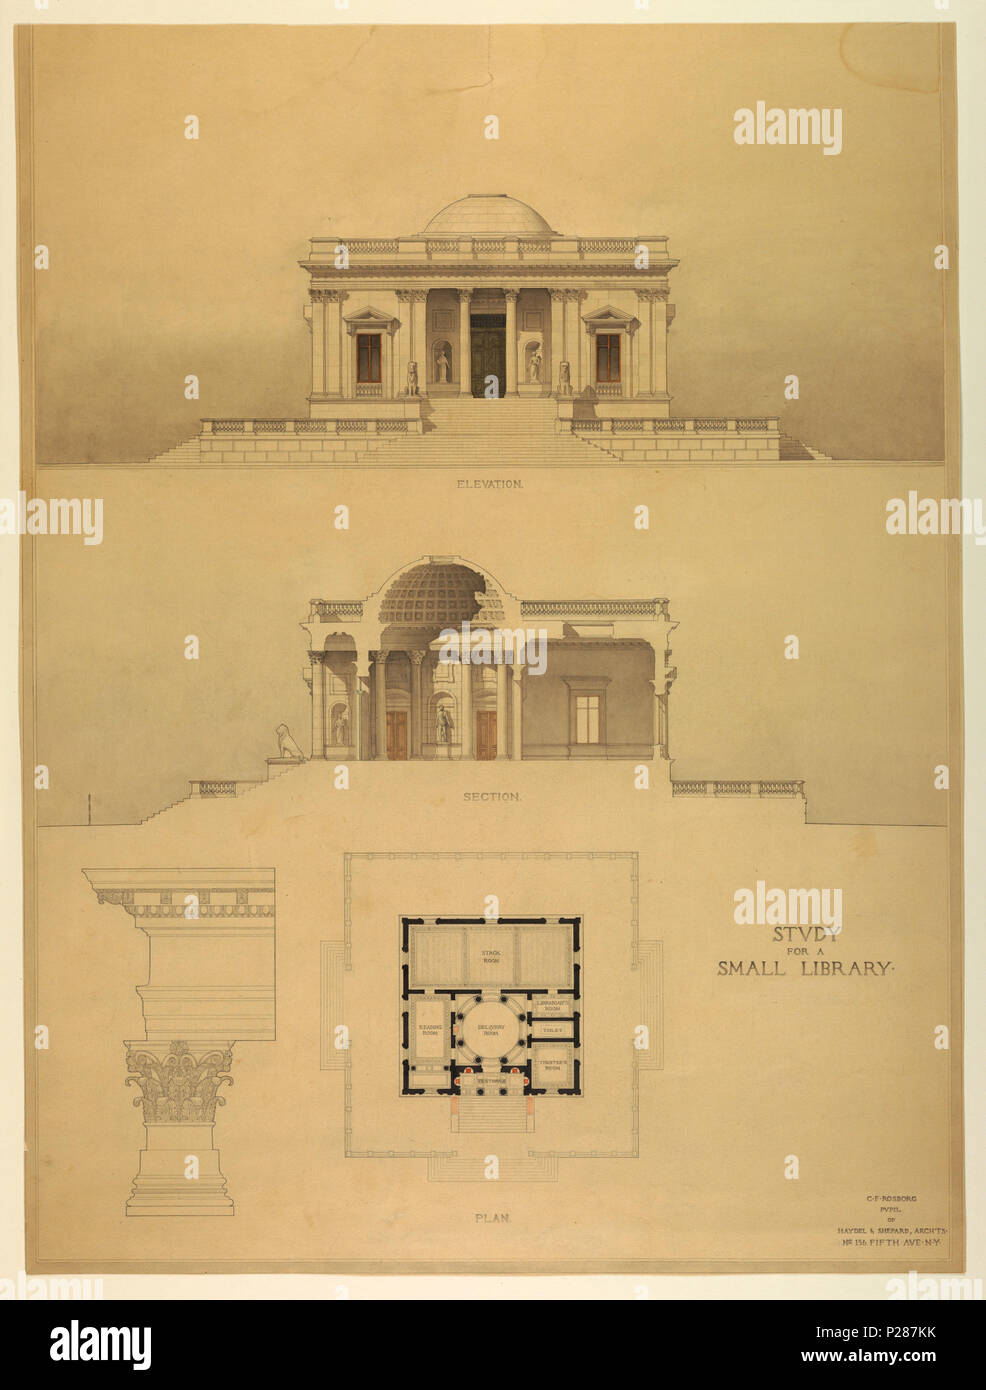 .  English: Drawing, Design for a small library: front elevation, section, plan, ca. 1905 .  English: Front elevation, above, of a small building in the classical style, standing on a podium. Center, a section through a side elevation, showing the vestibule, delivery room, and Stack room. Plan, below, and detail of order (Corinthian), left. . circa 1905 101 Drawing, Design for a small library- front elevation, section, plan, ca. 1905 (CH 18397755-2) Stock Photo